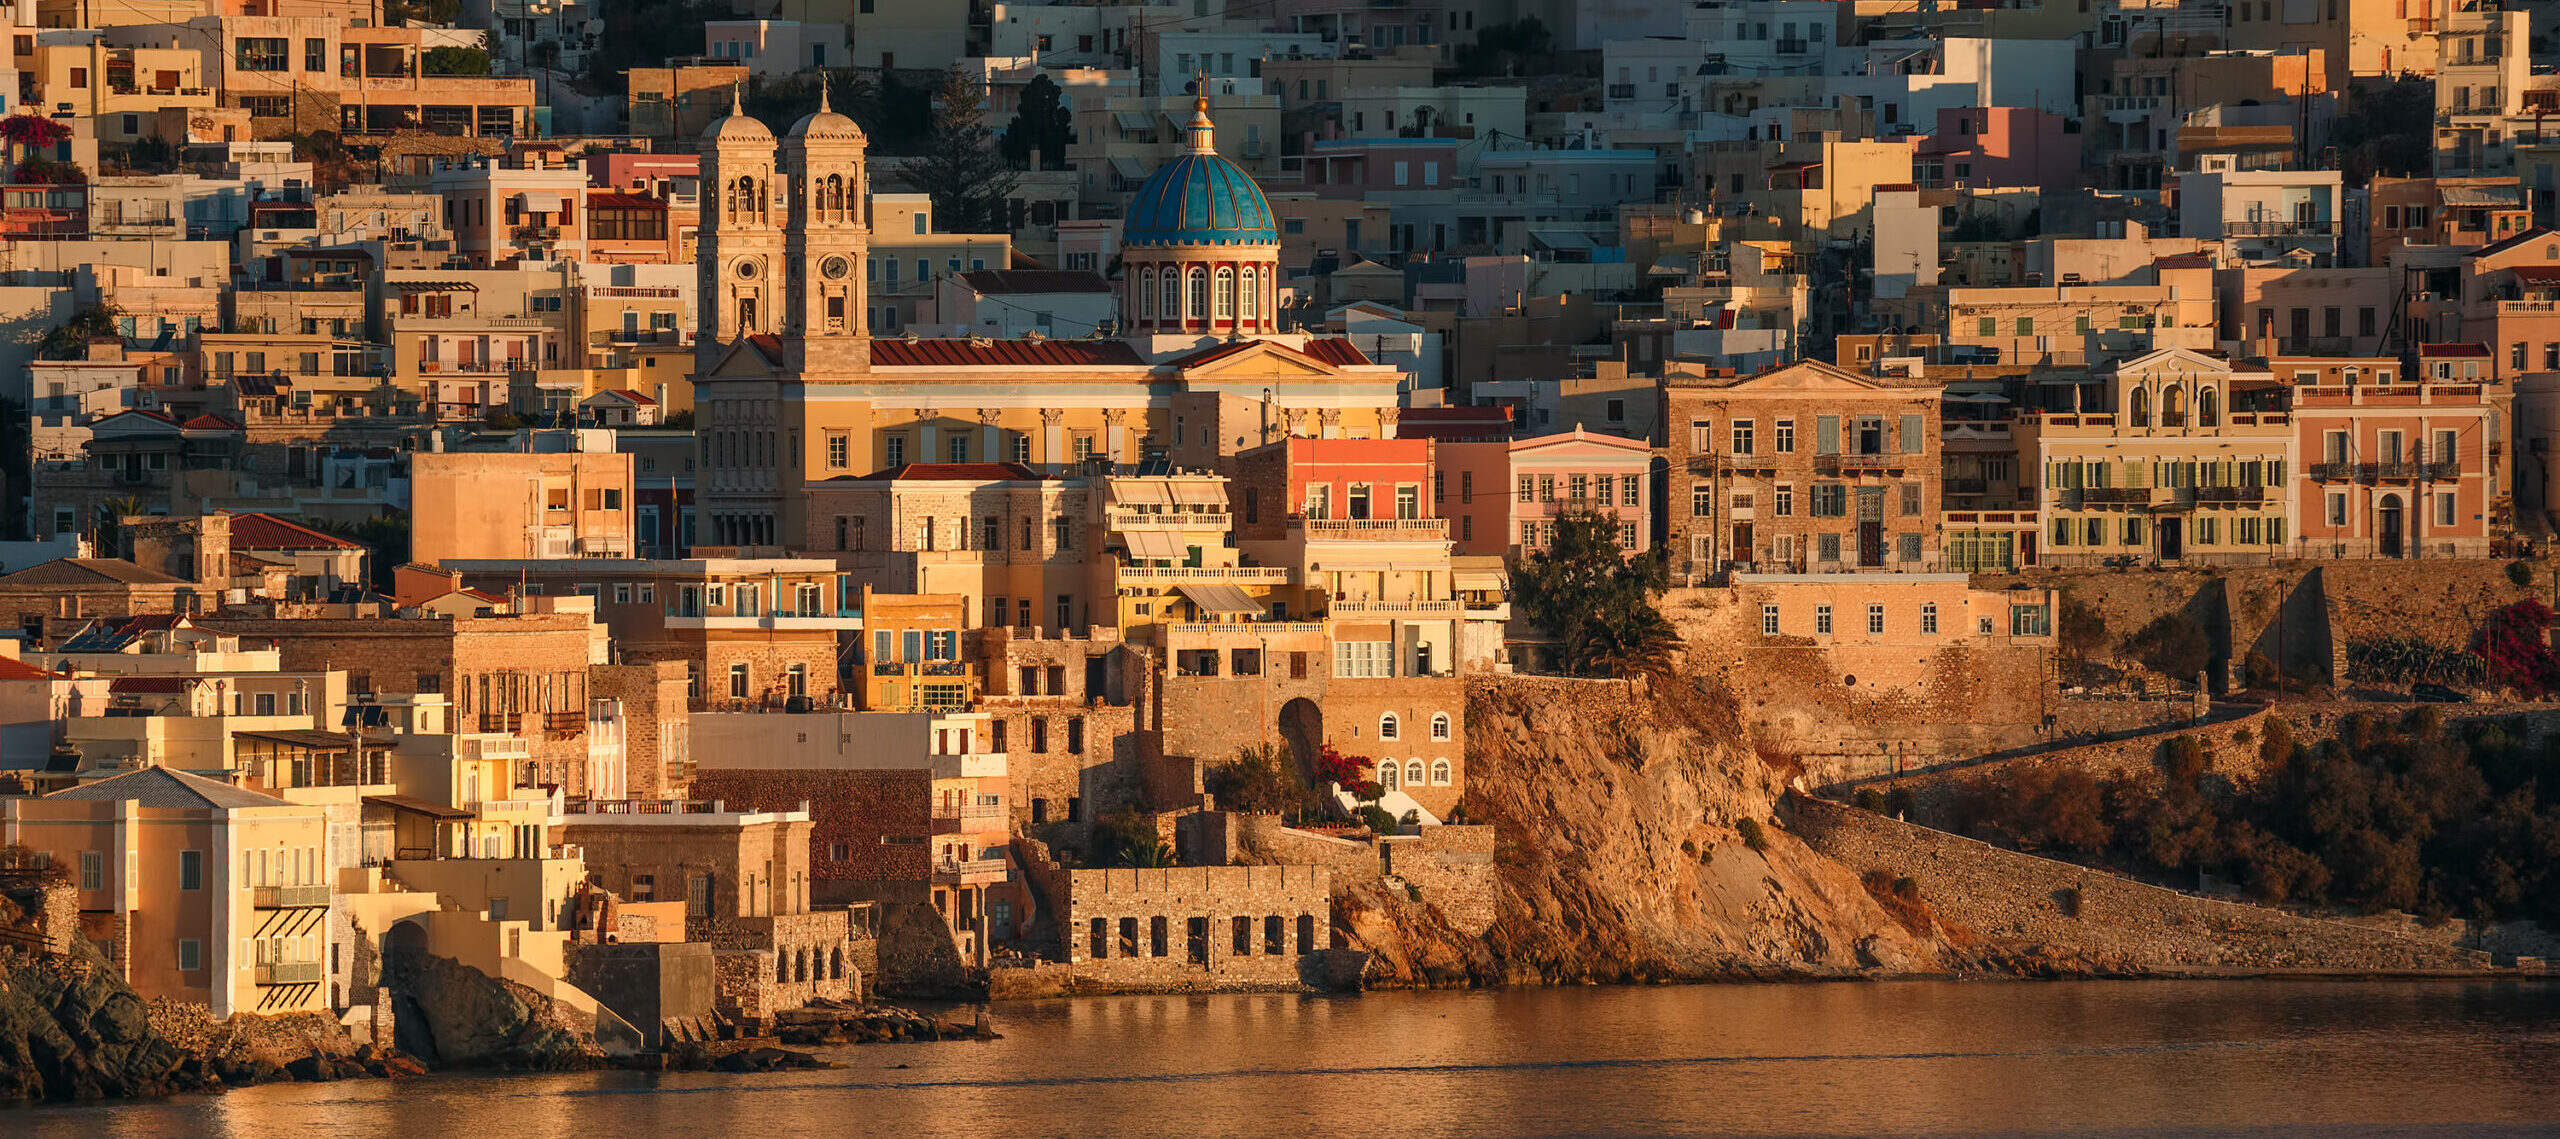 Syros: A gastronomic trip with the traditional recipe for loukoumia (Turkish delights)